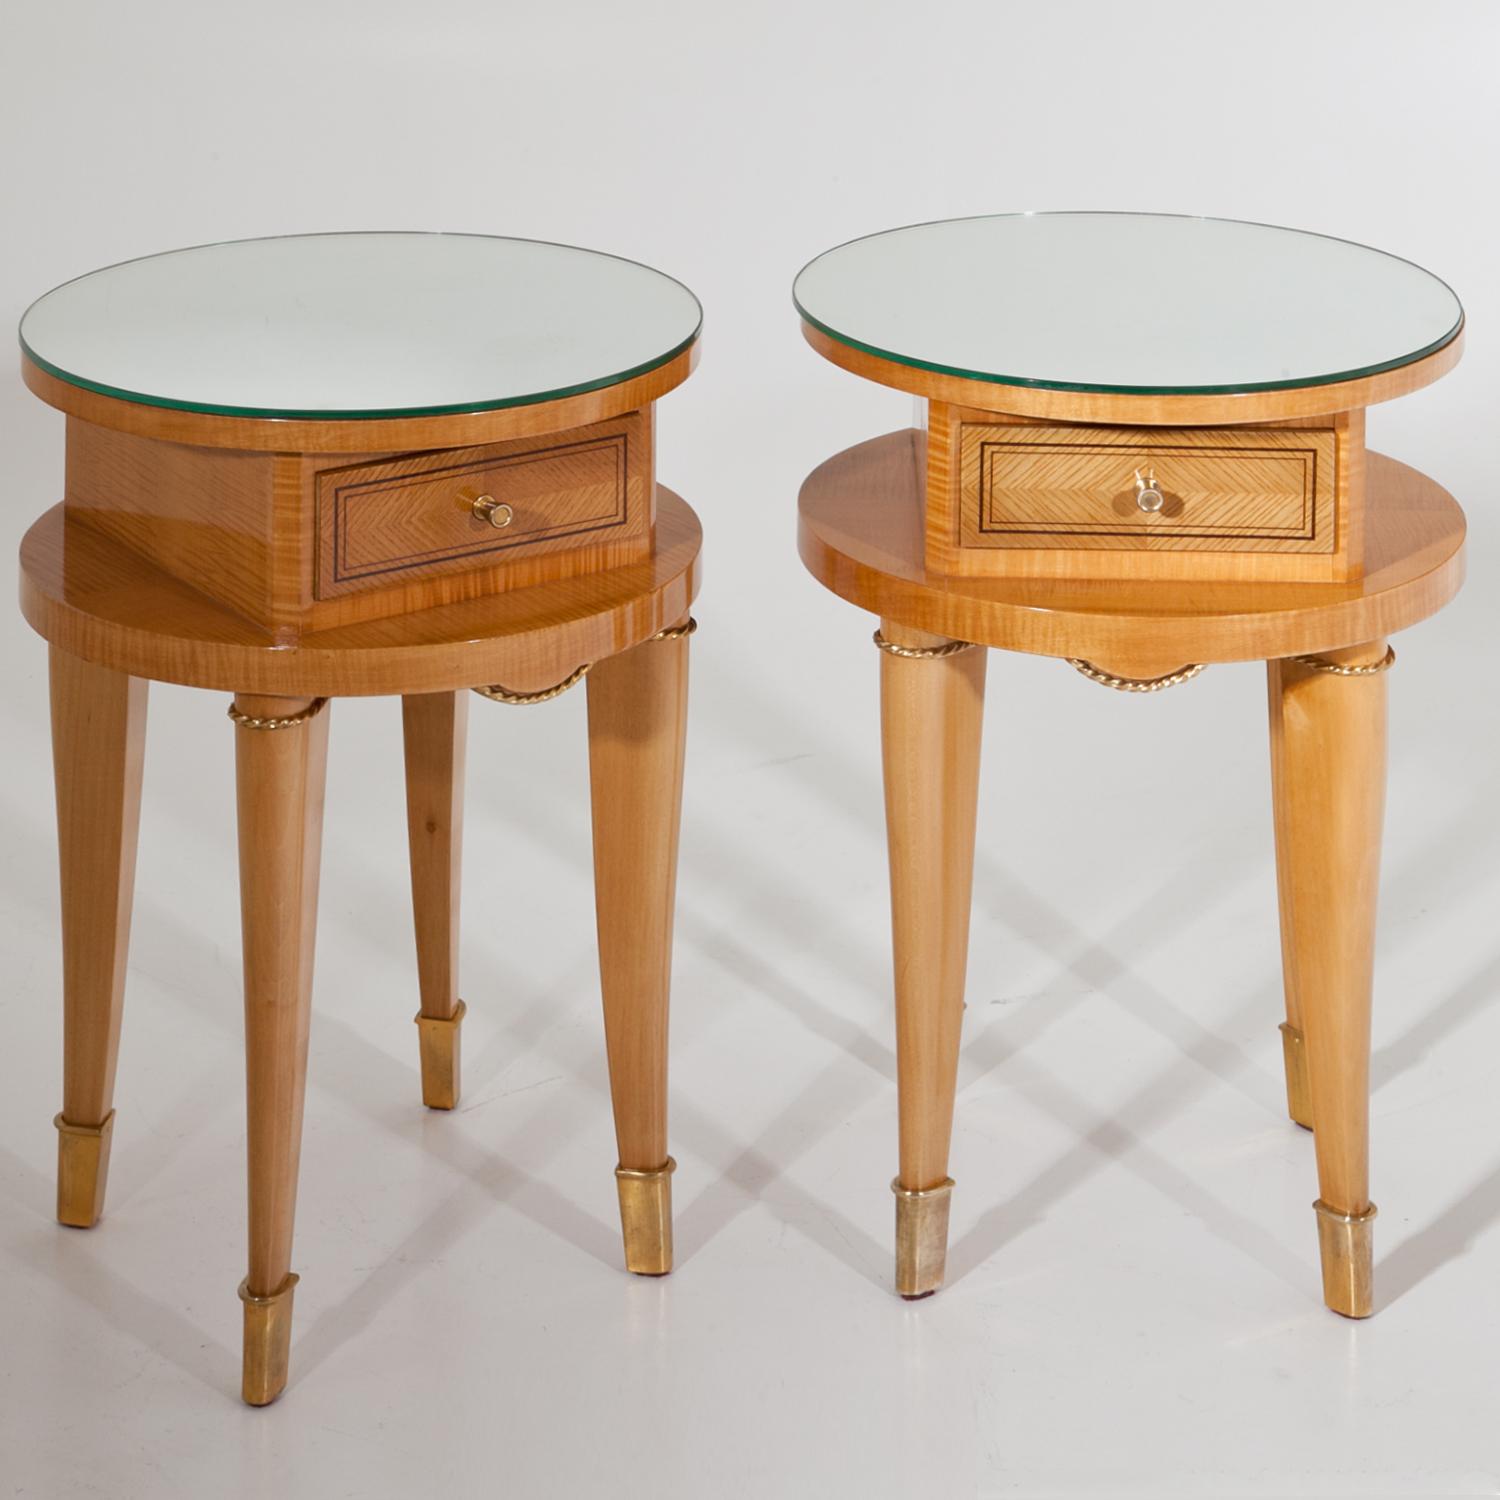 Pair of side tables or nightstands on tall tapered legs with brass sabots and twisted rings. The round tabletop is covered with a mirror pane, underneath is one small drawer. Unrestored condition.